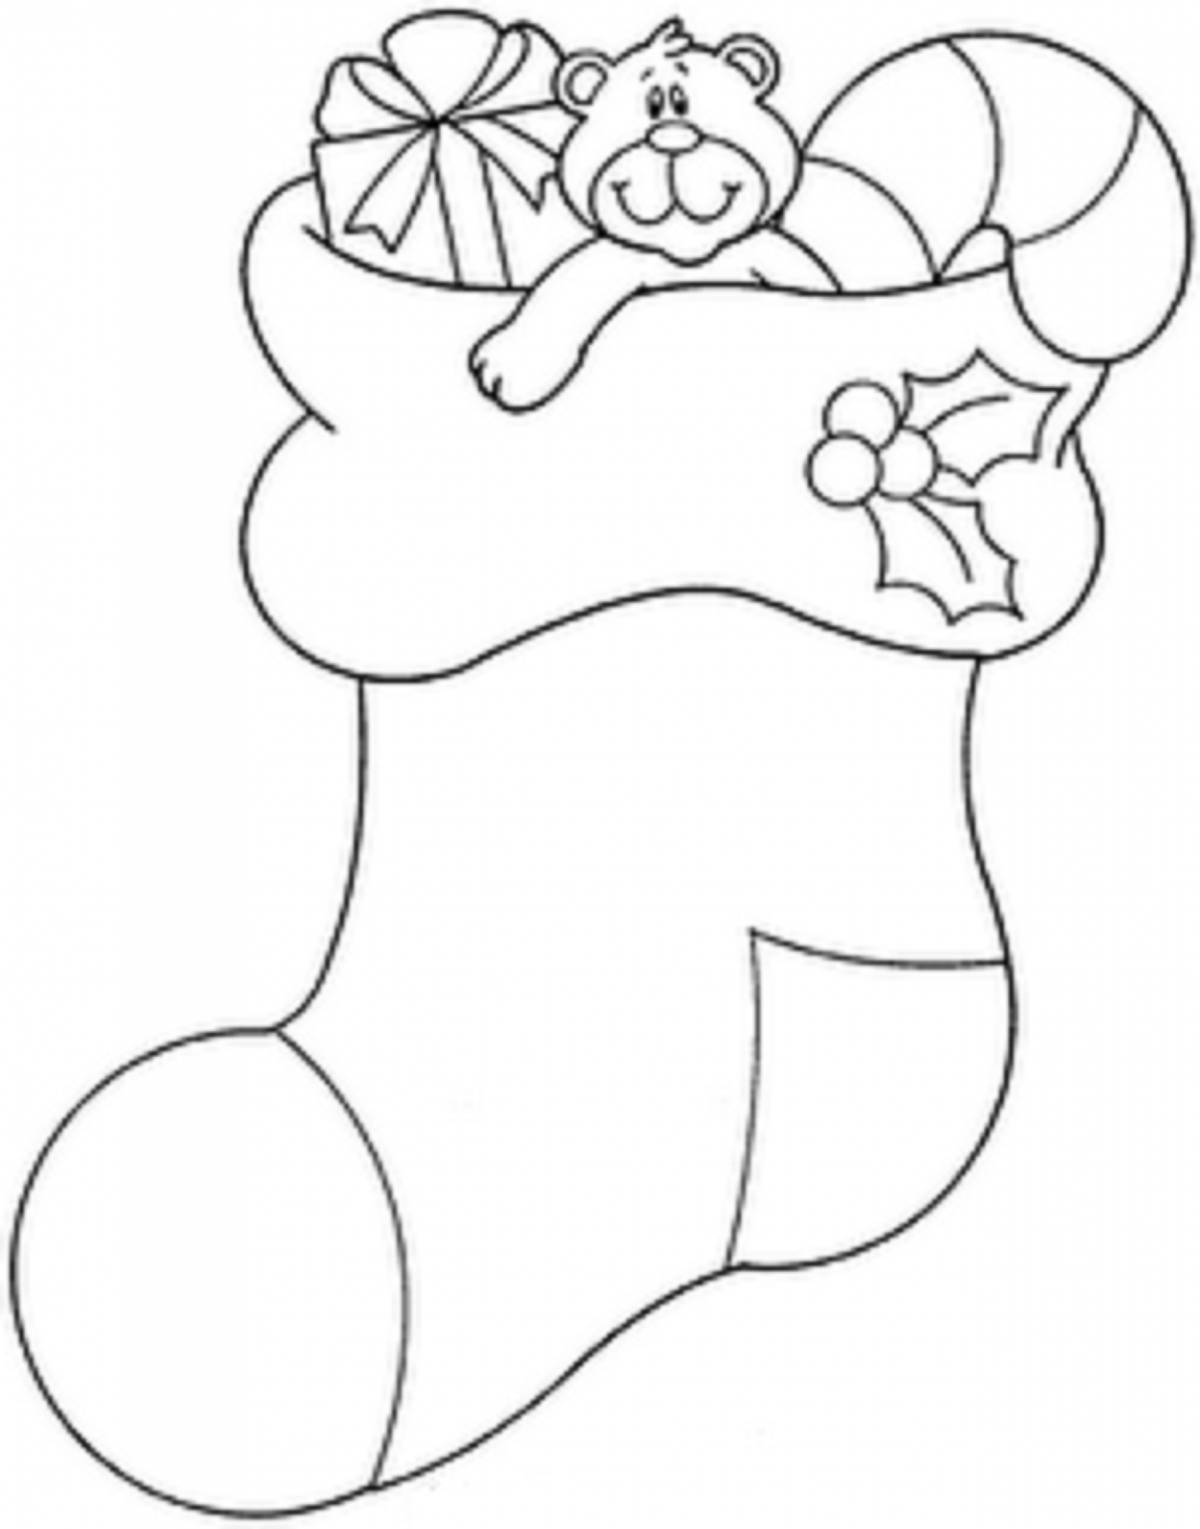 Coloring page joyful boots